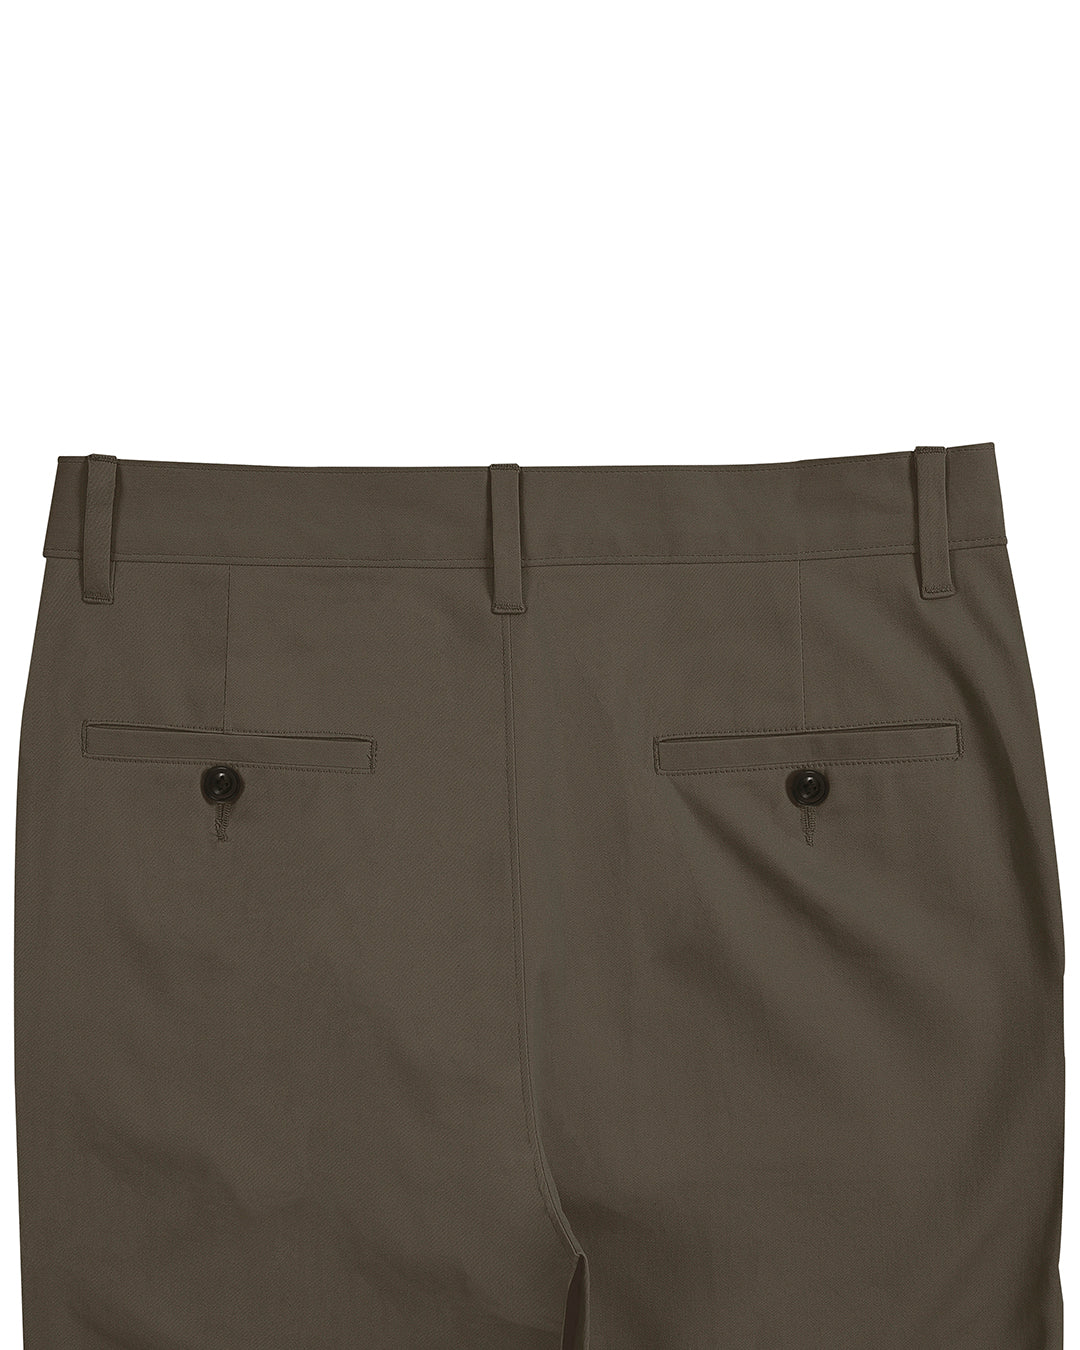 Back view of custom Genoa Chino pants for men by Luxire in khaki brown